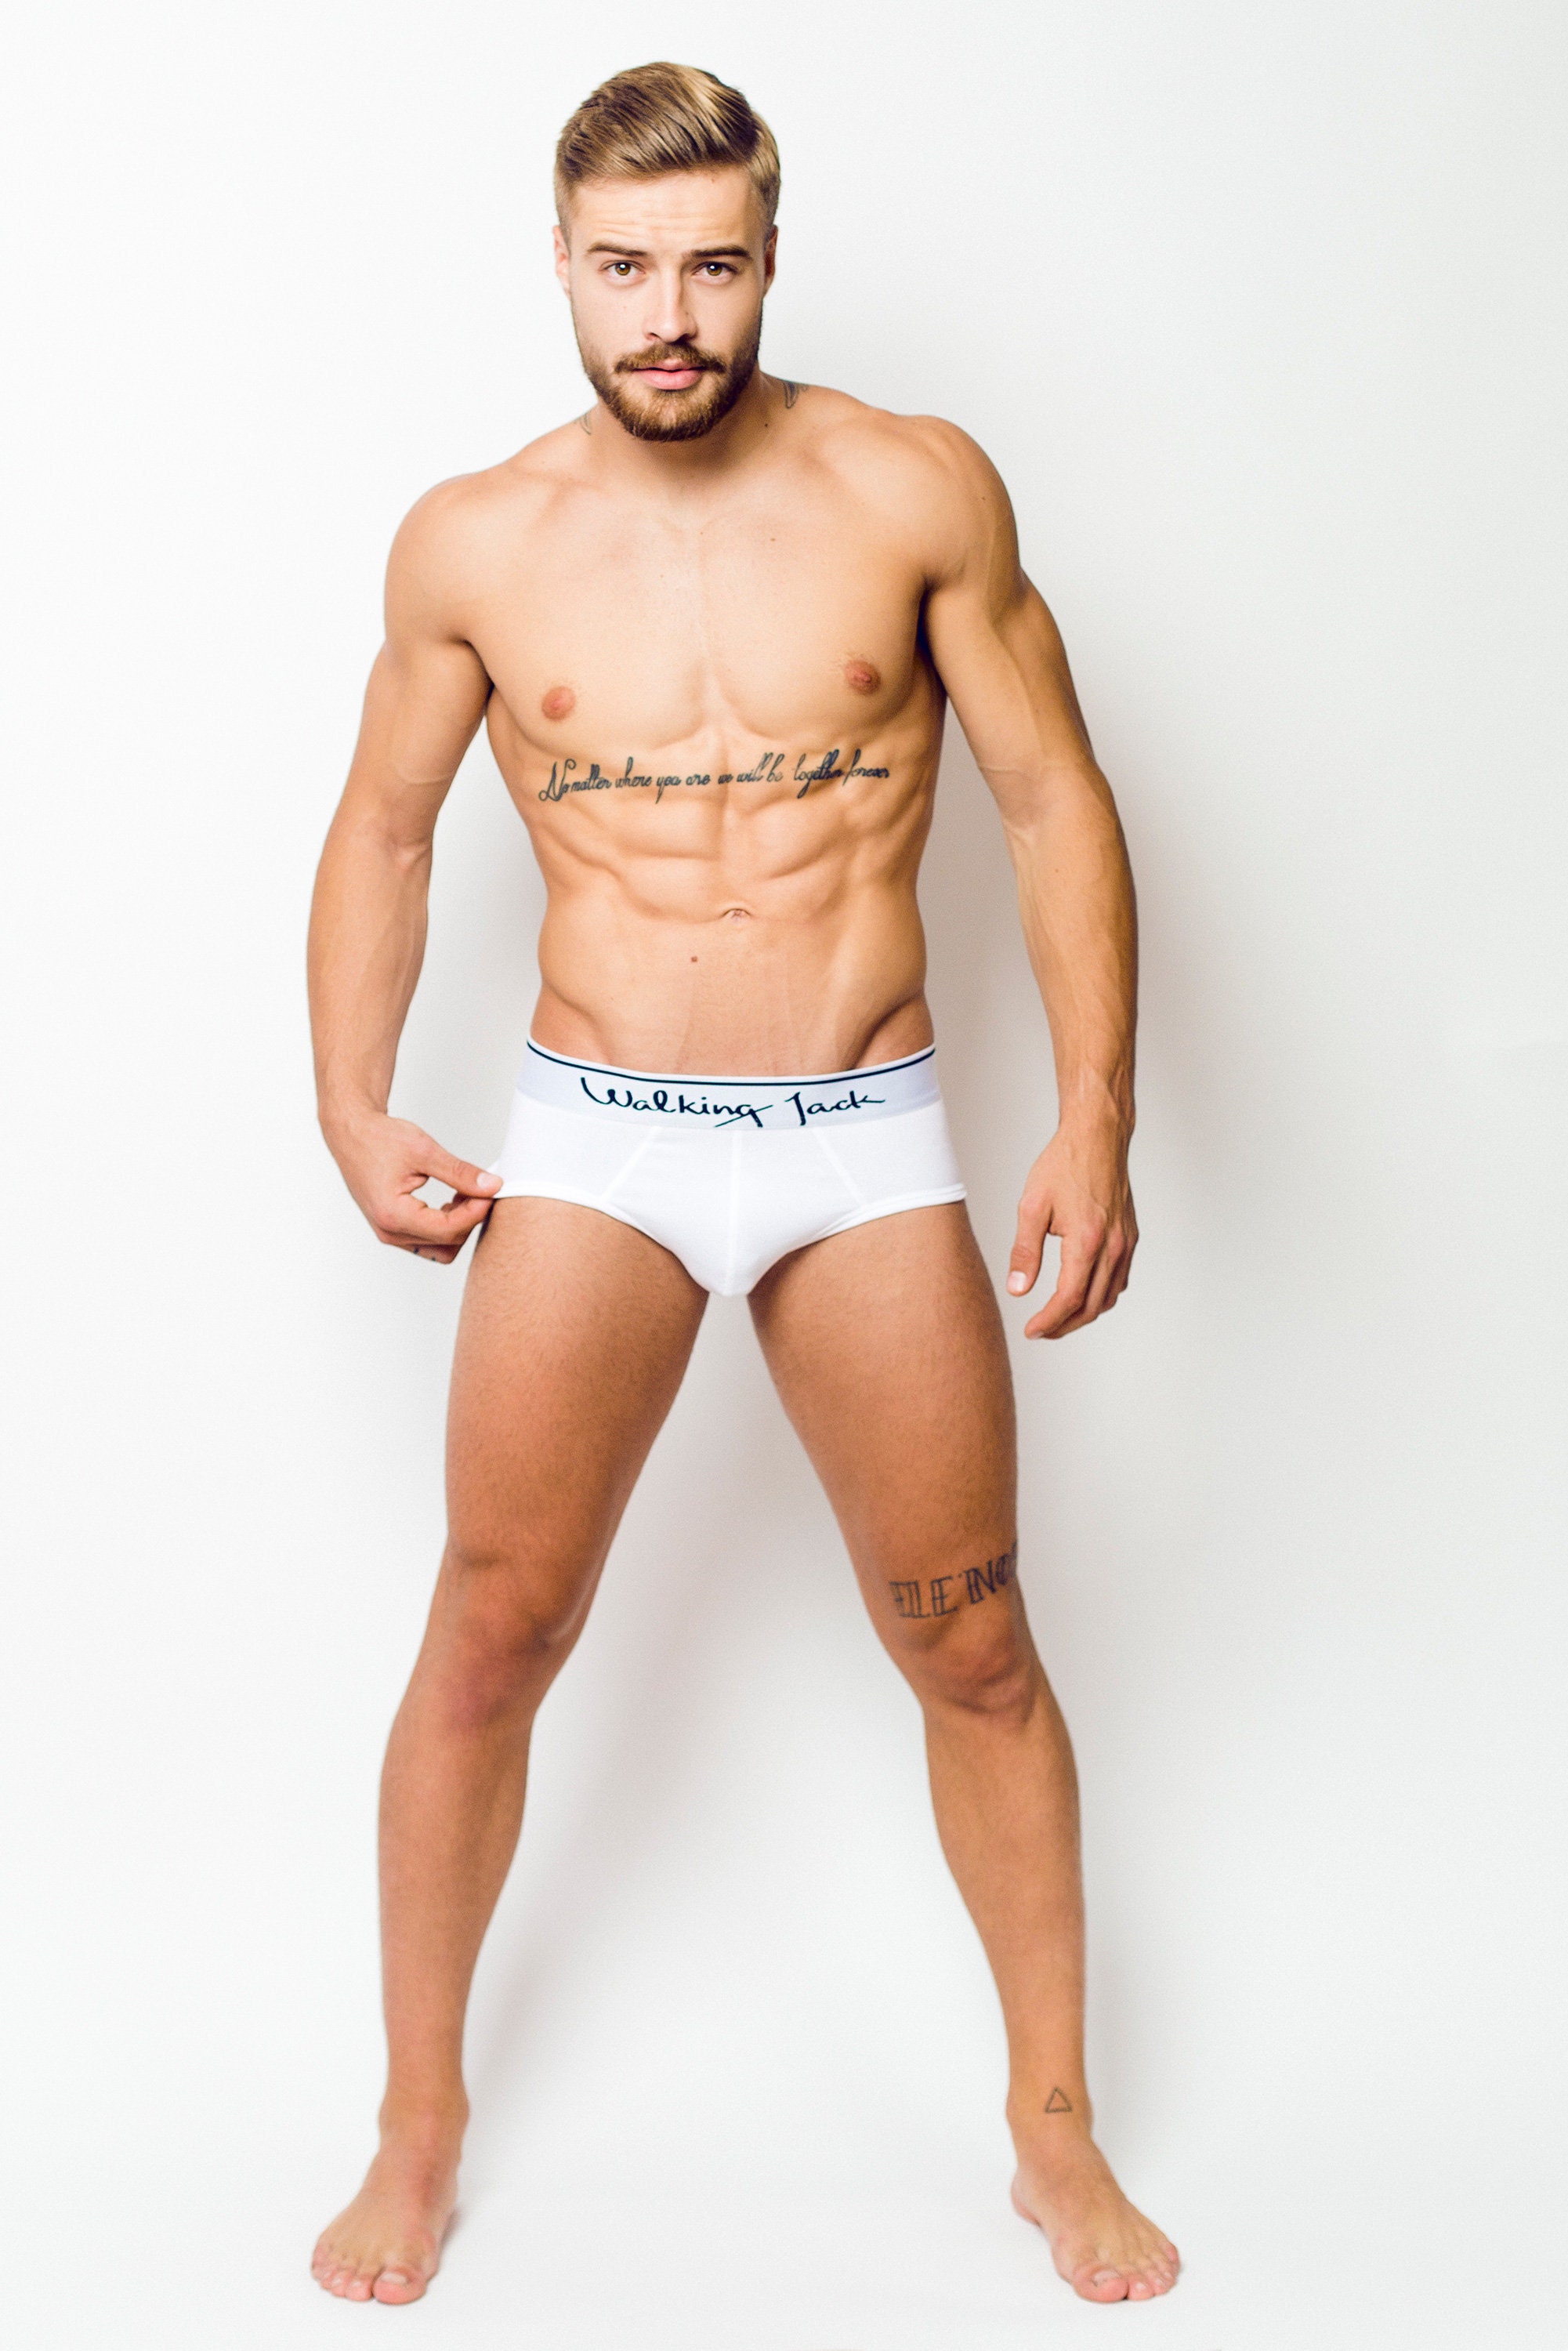 The new Micro Briefs from Walking Jack are a perfect little pair